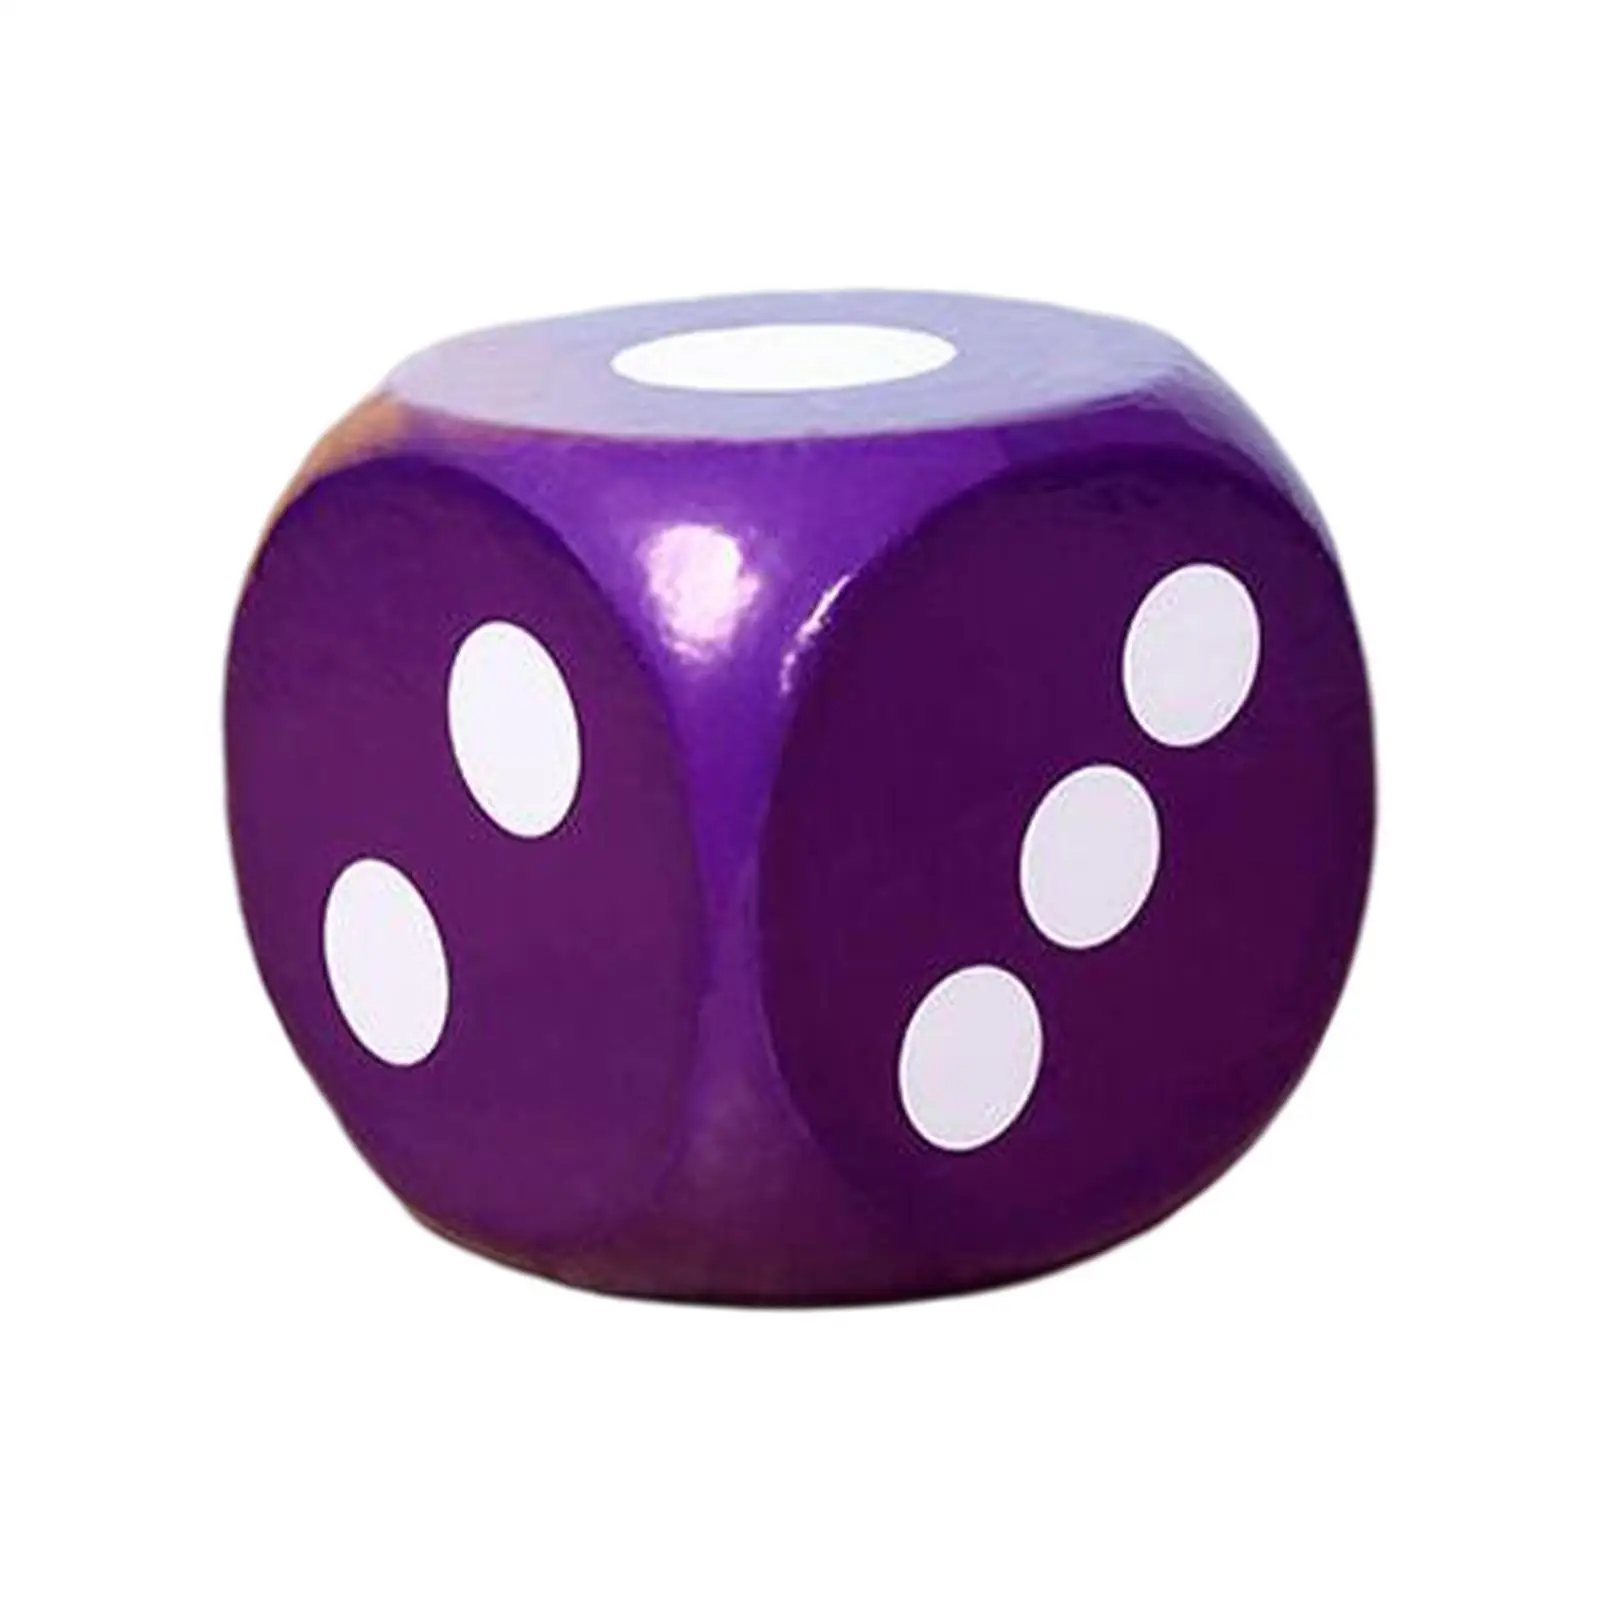 6 Sided Foam Dice Early Math Skills Early Learning Toys Dot Dice Game Dice for Children Boys and Girls Carnival School Supplies